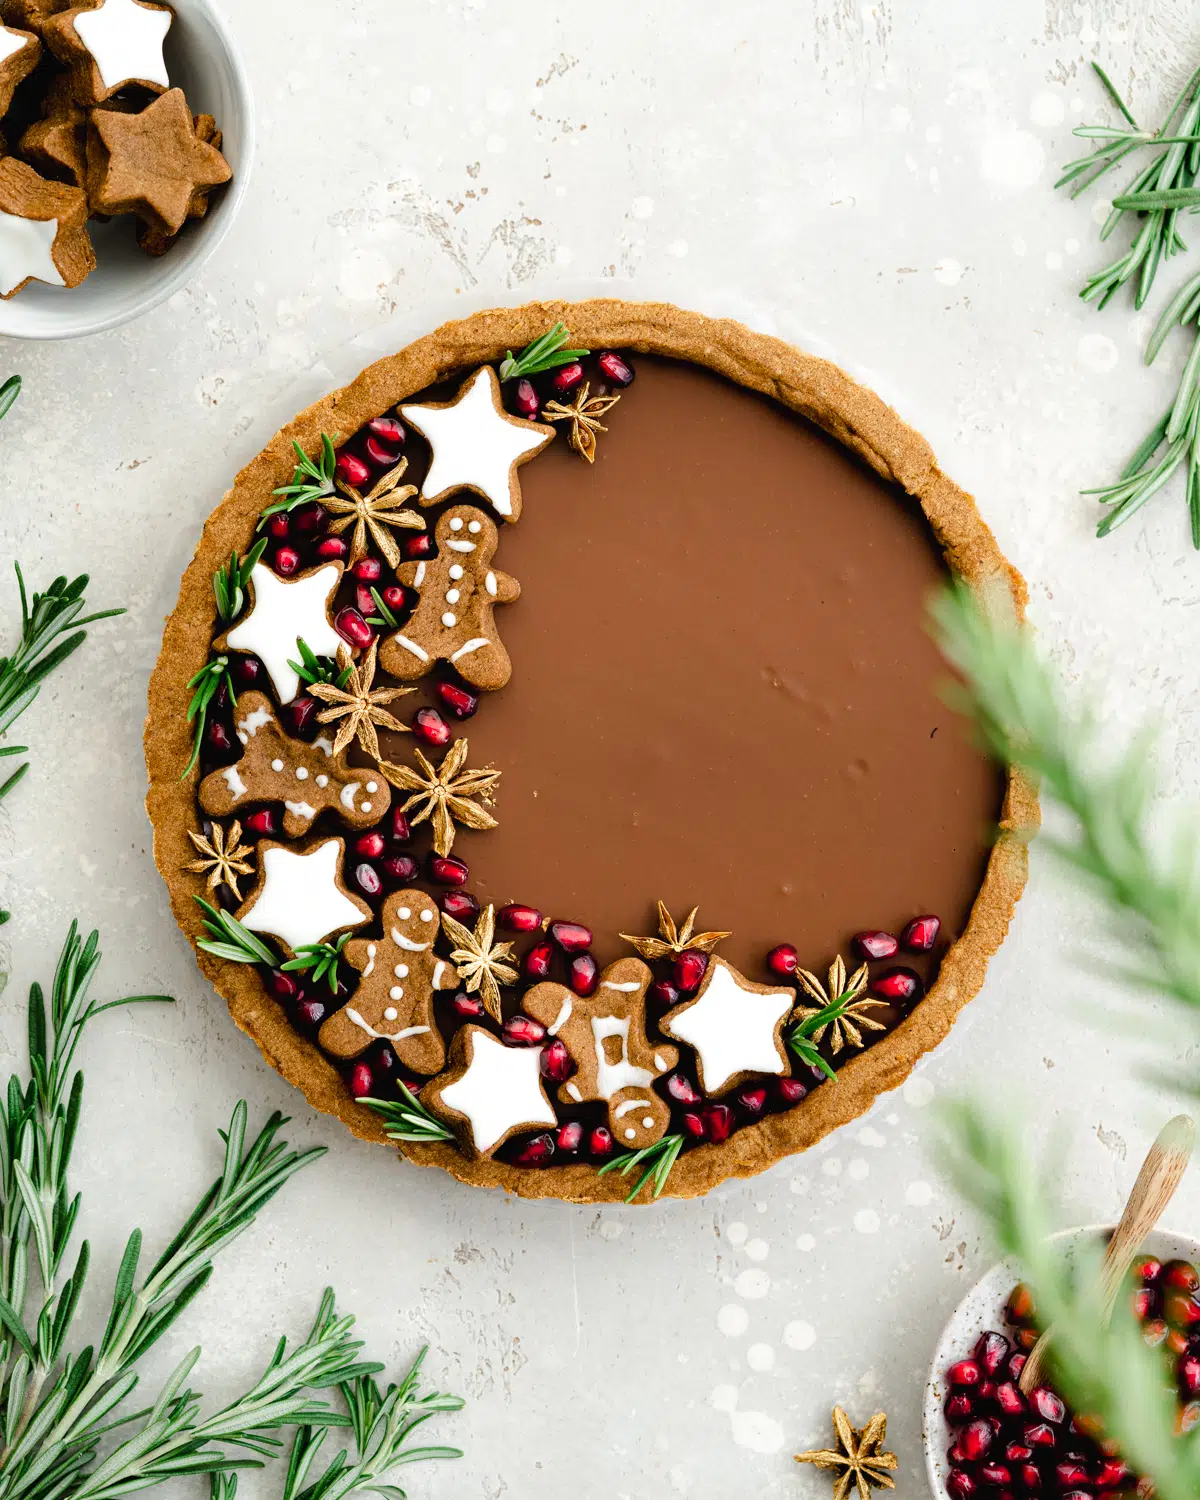 chocolate tart with gingerbread cookies and pomegranate seeds on top.